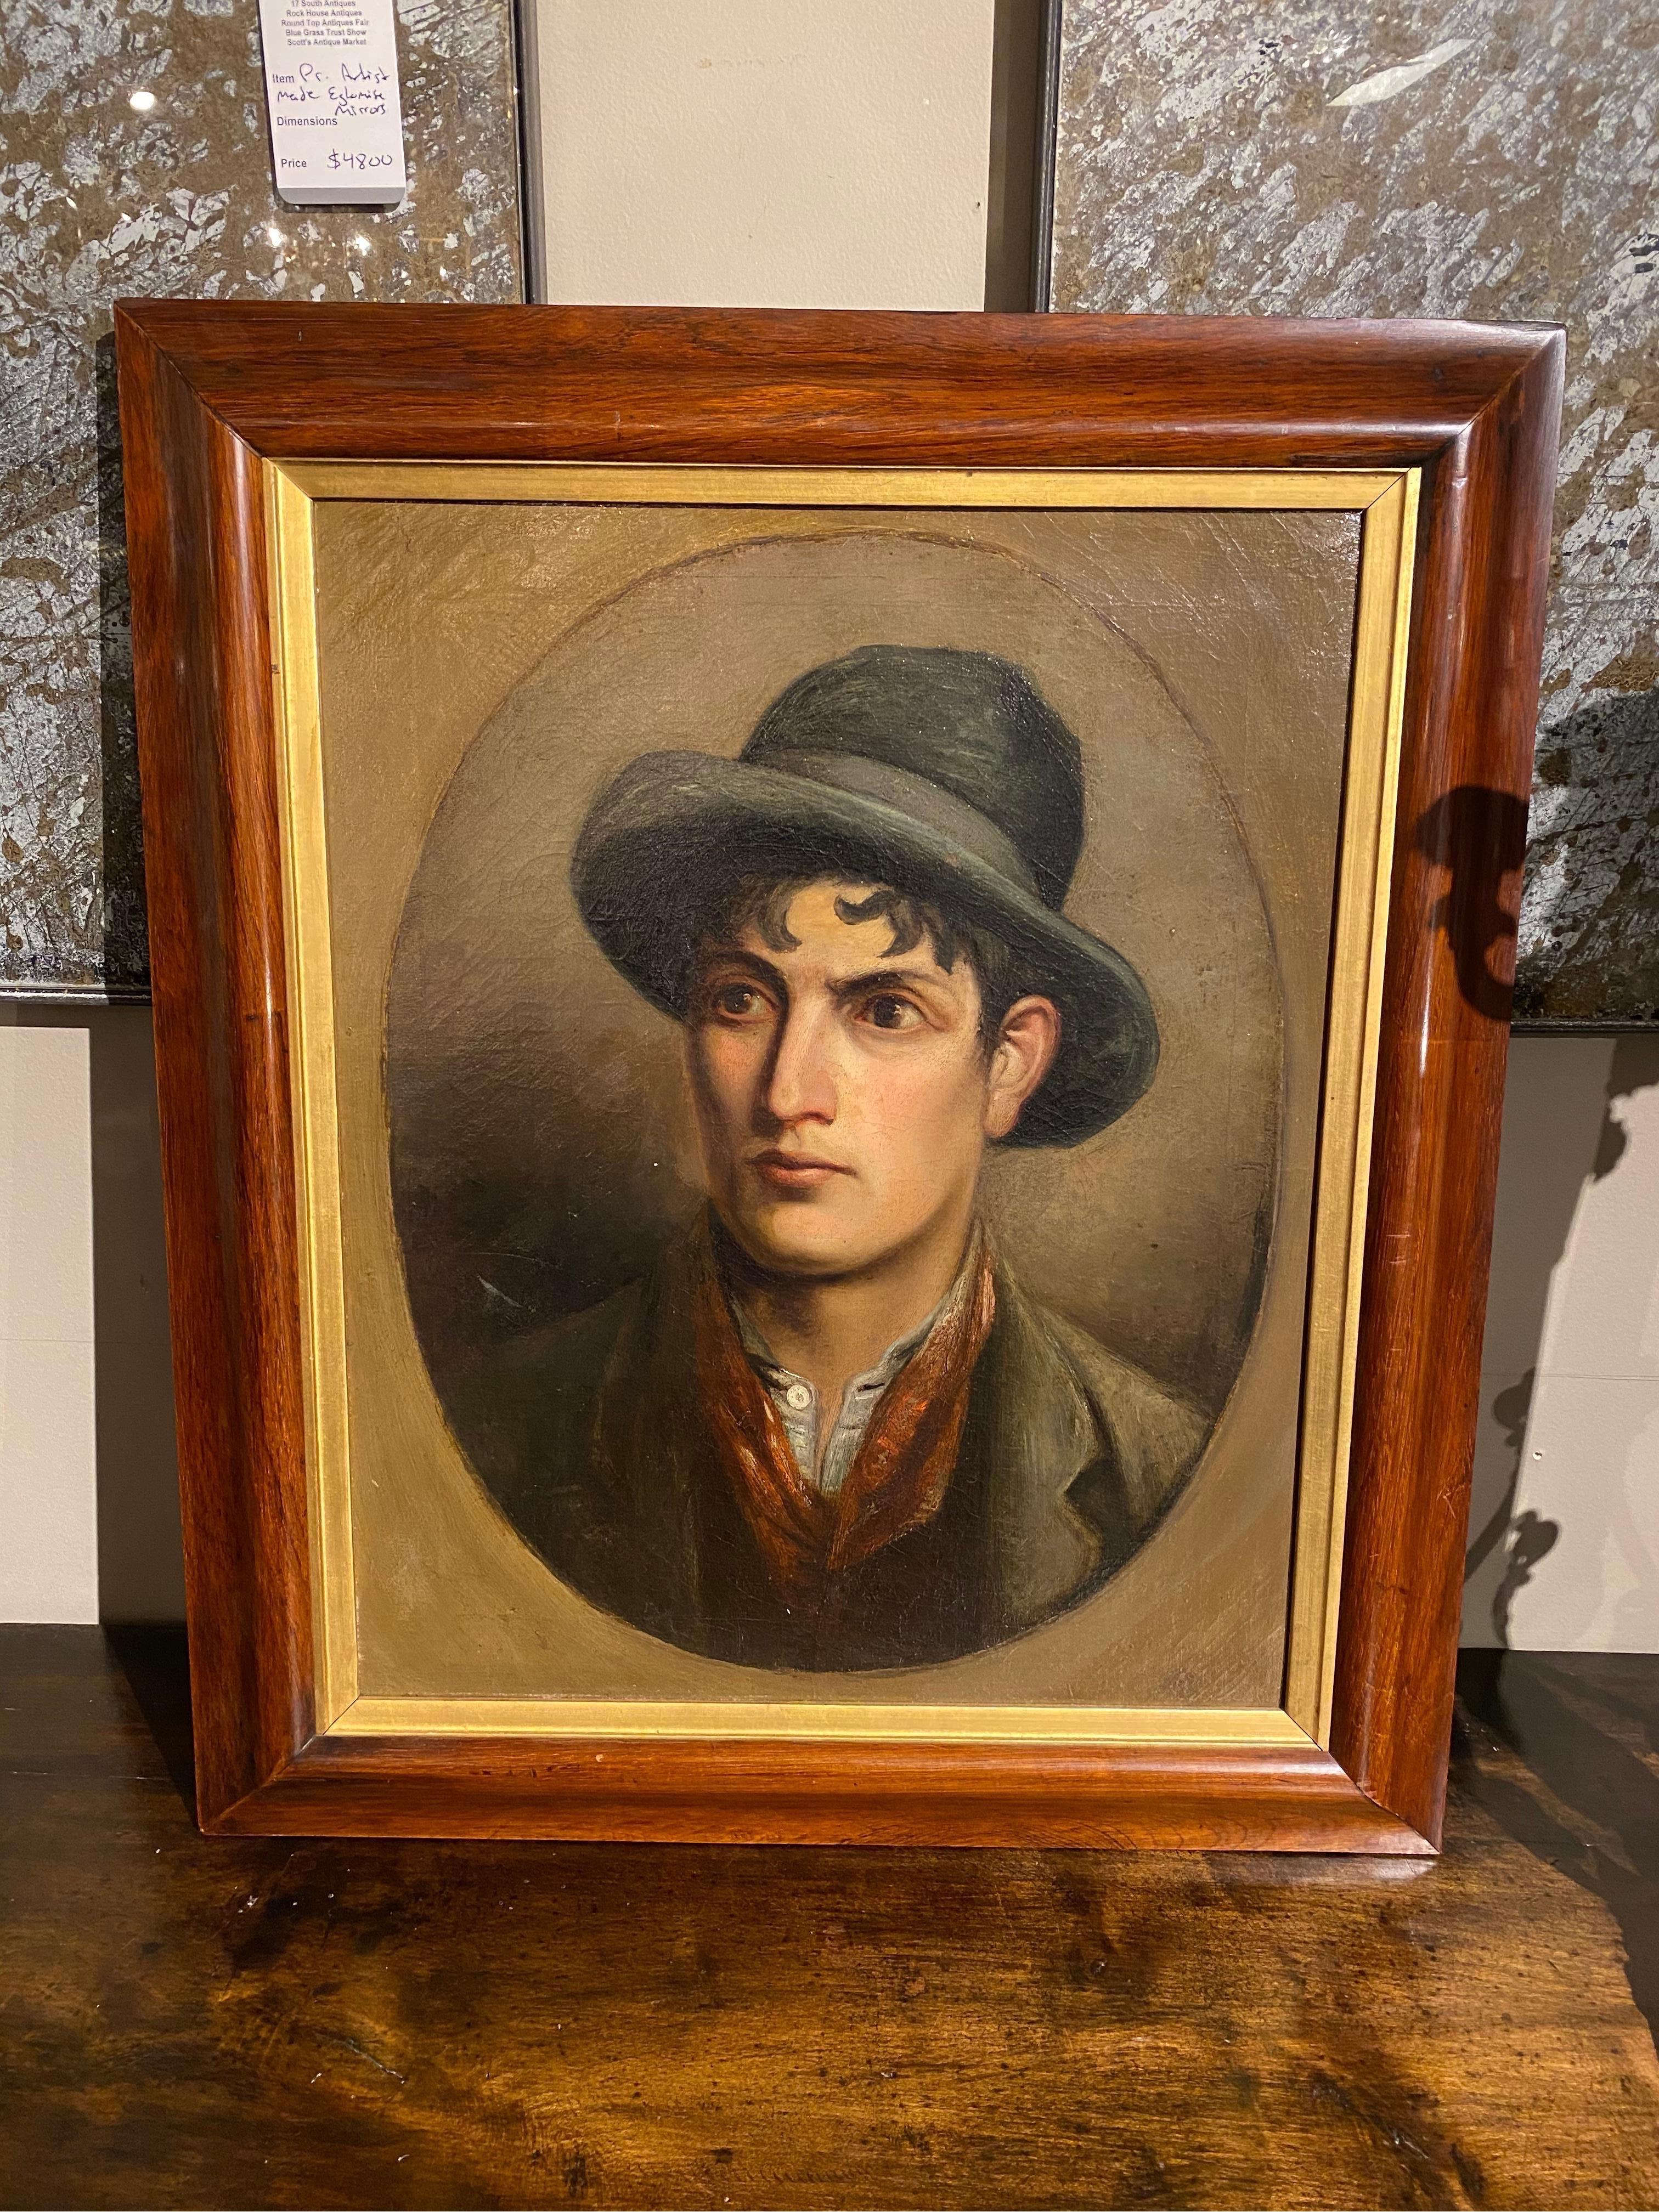 Great quality portrait originally purchased in Dublin of an Irishman.

Painting measures: 17.08